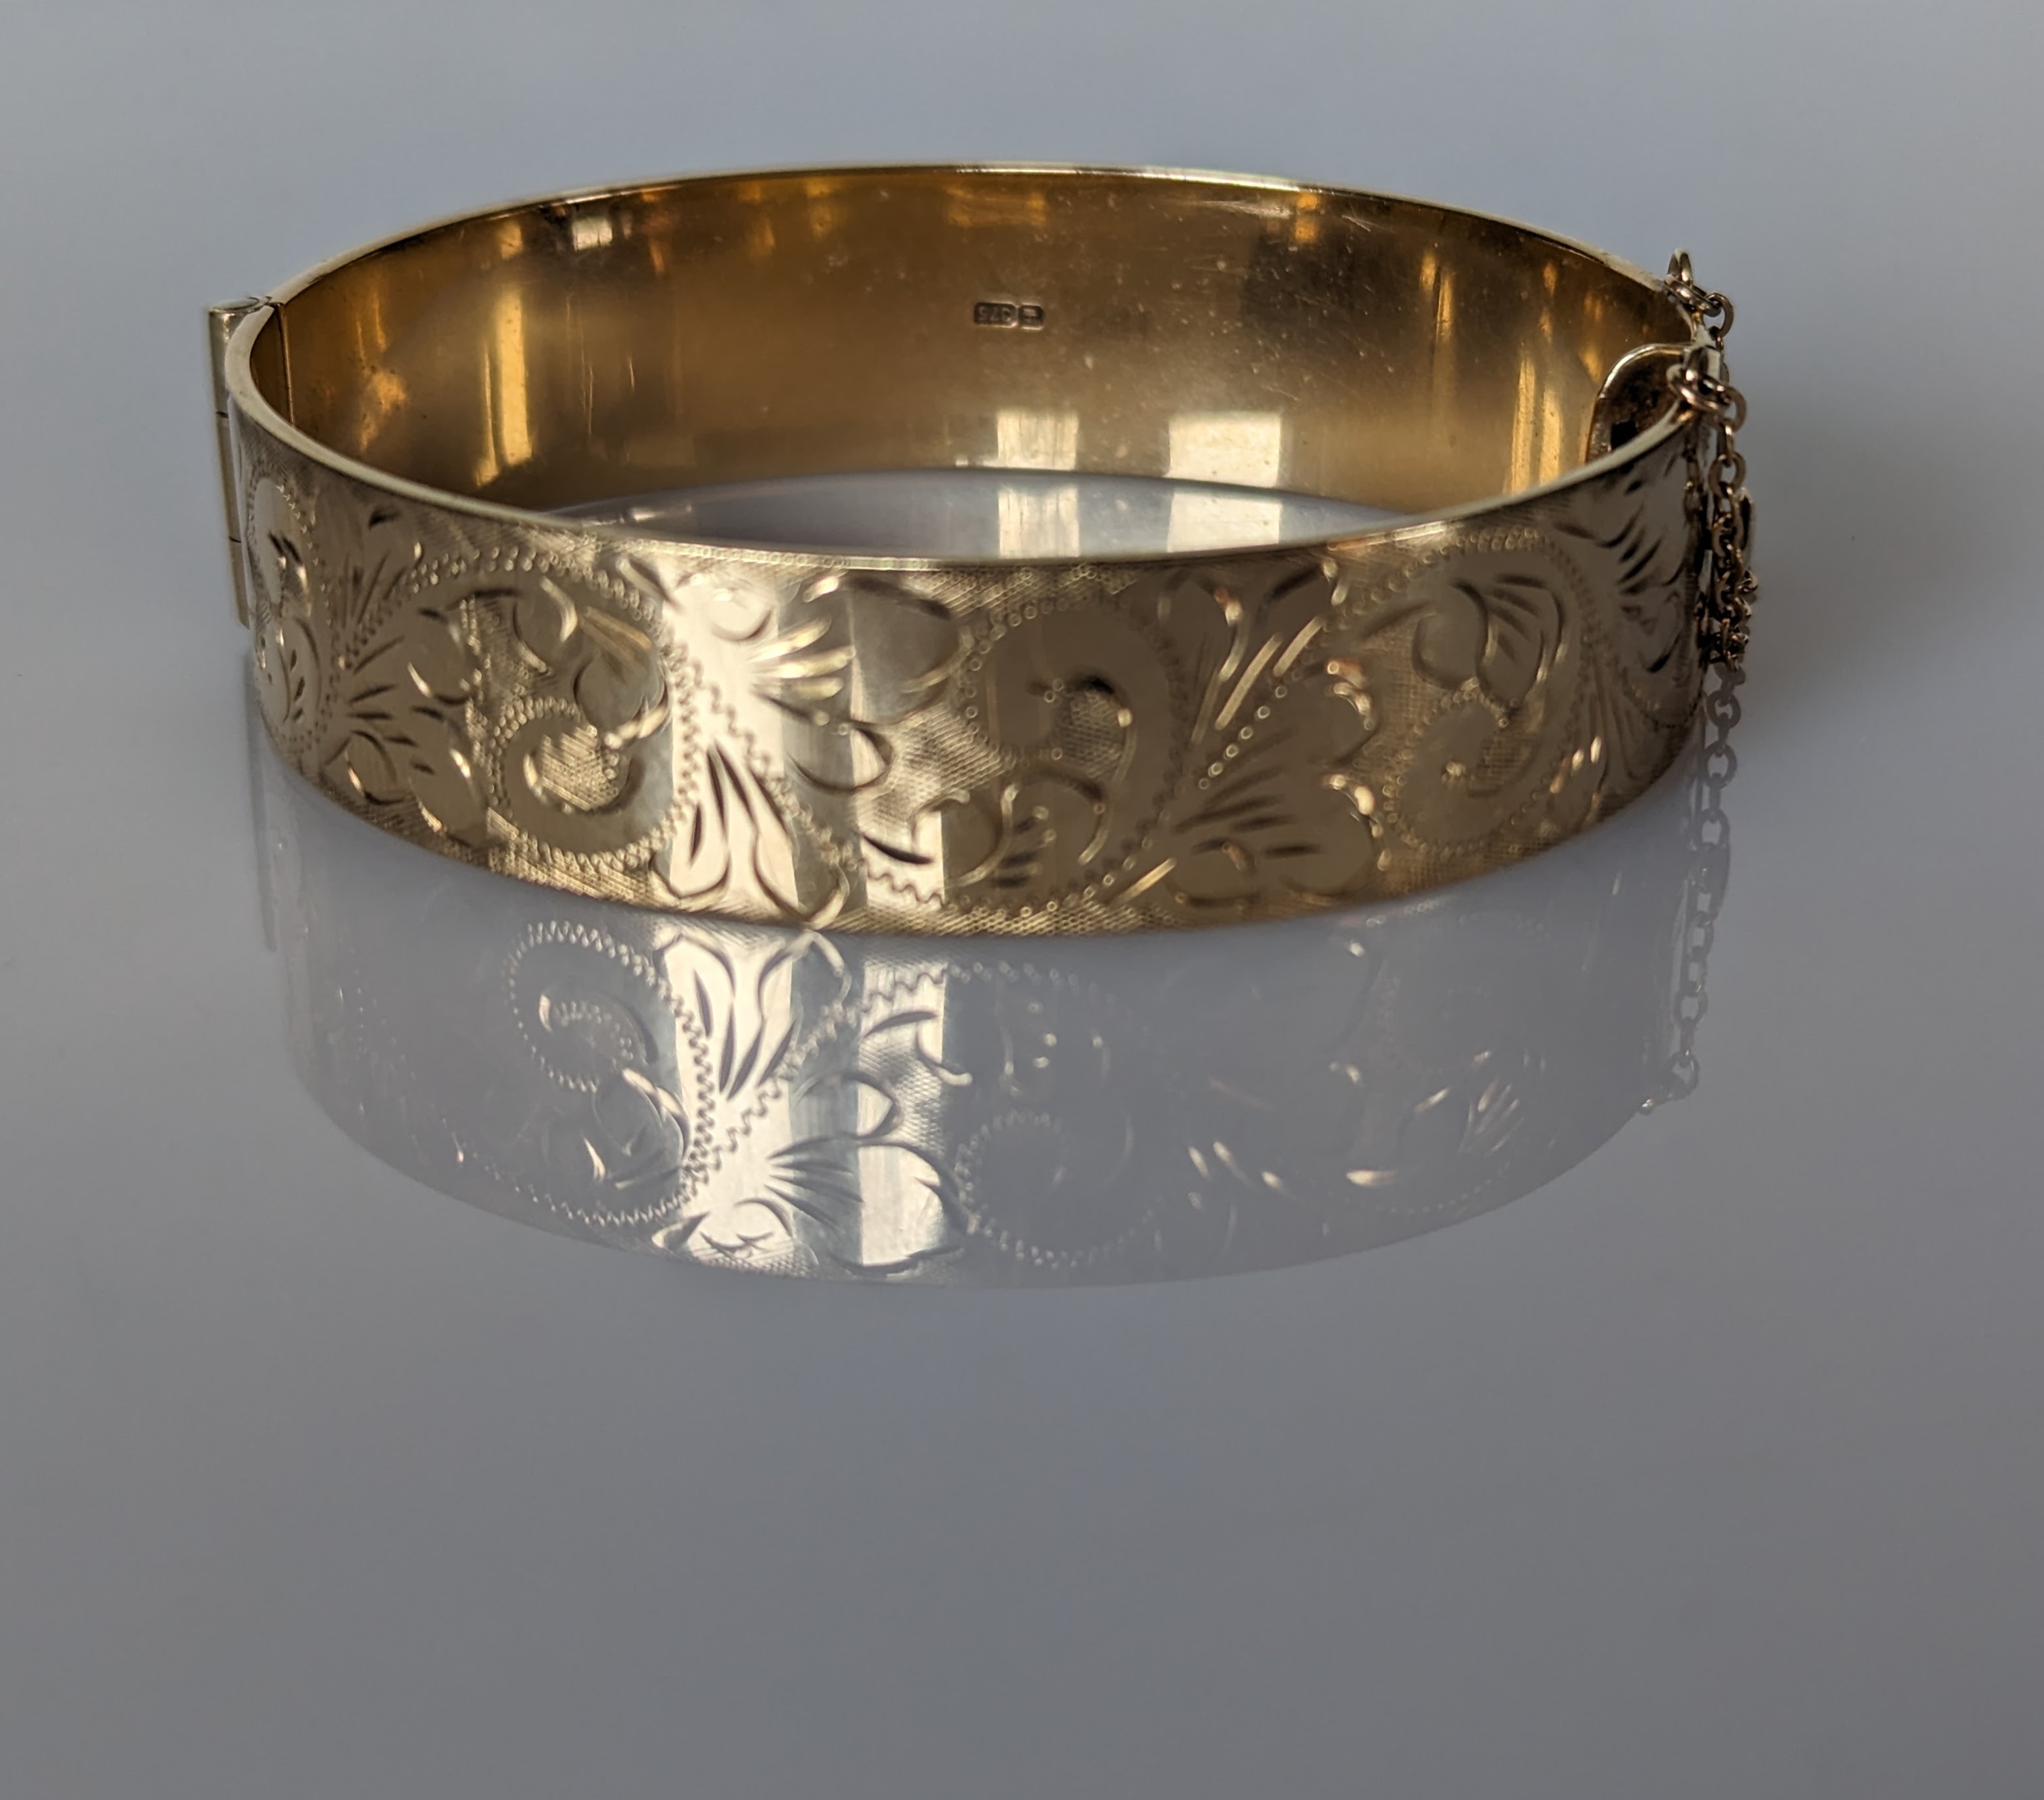 An etched 9ct gold bangle, 60mm, hallmarked for R P H Jewellery Co Ltd, Birmingham, 44g